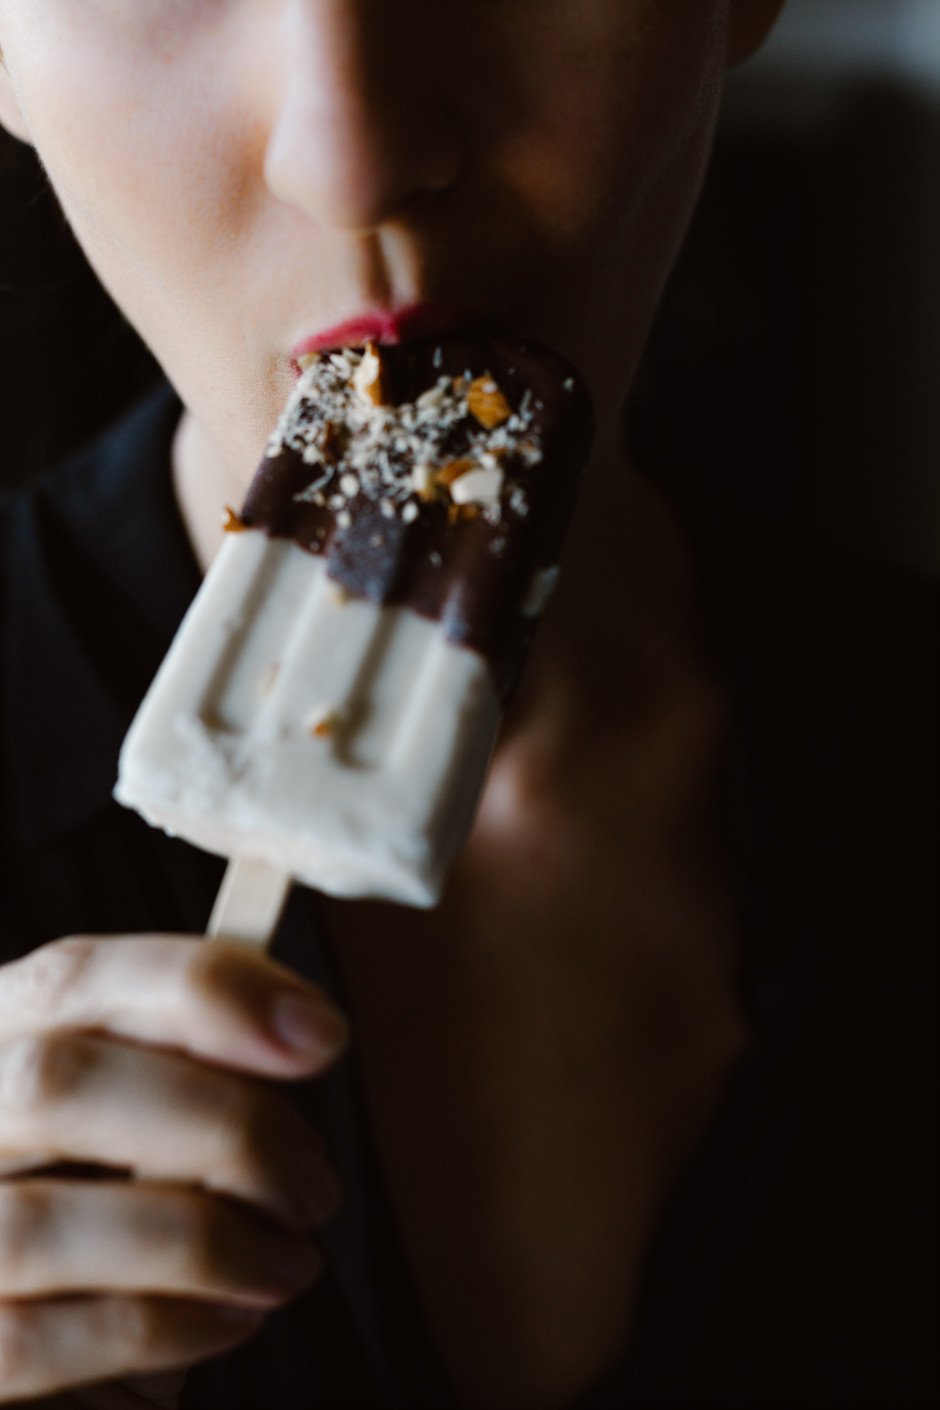 a close up of a person biting into an ice cream bar.